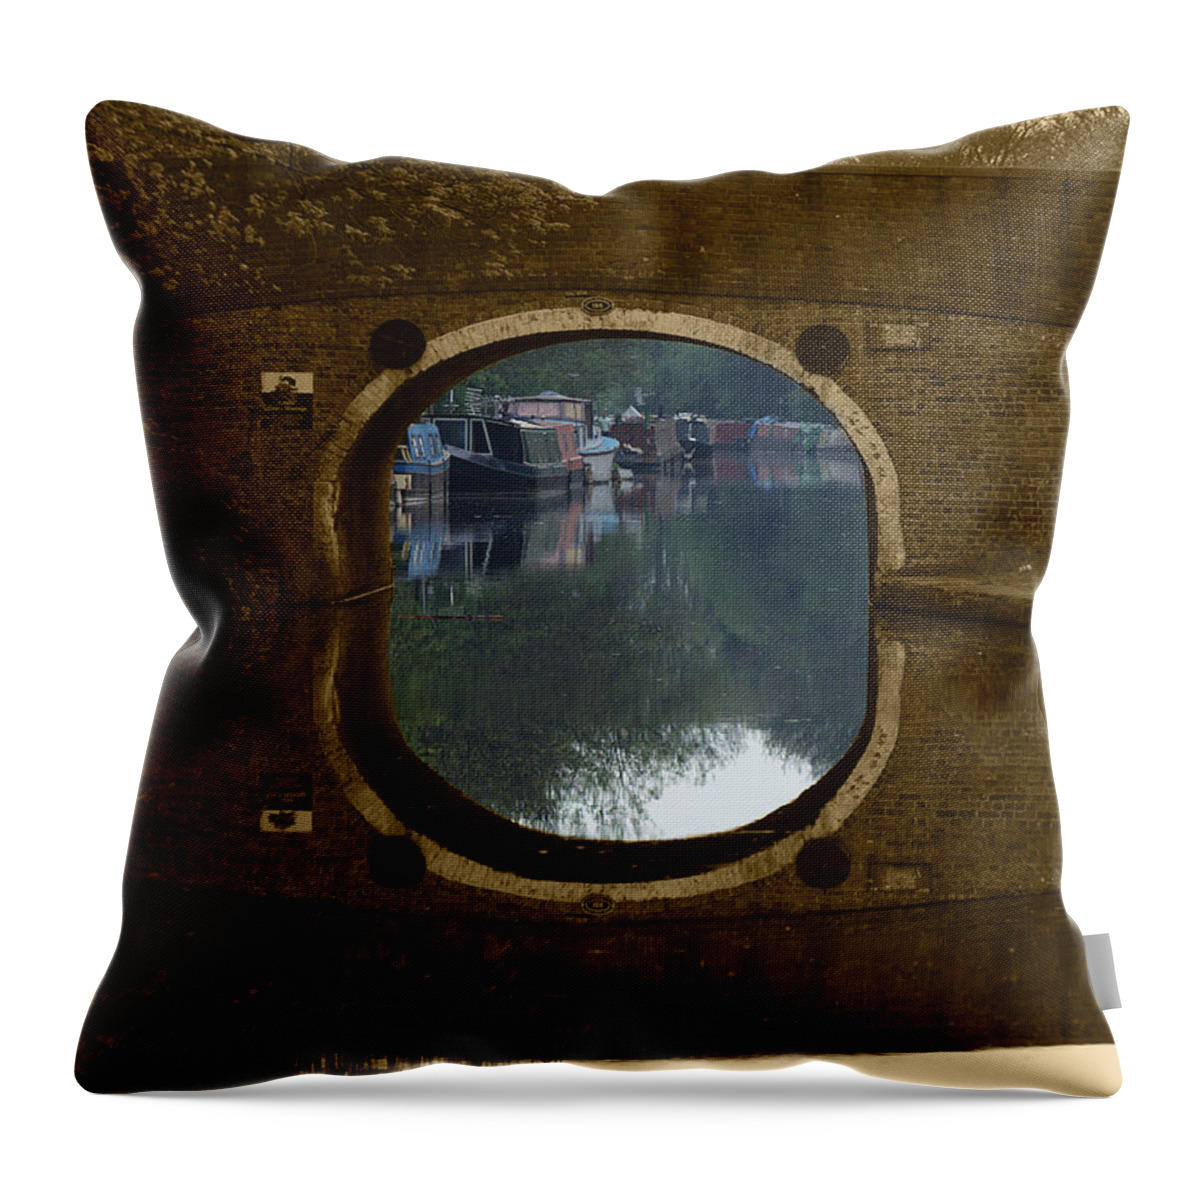 Grand Union Canal Throw Pillow featuring the photograph Cowley Bridge by Chris Day